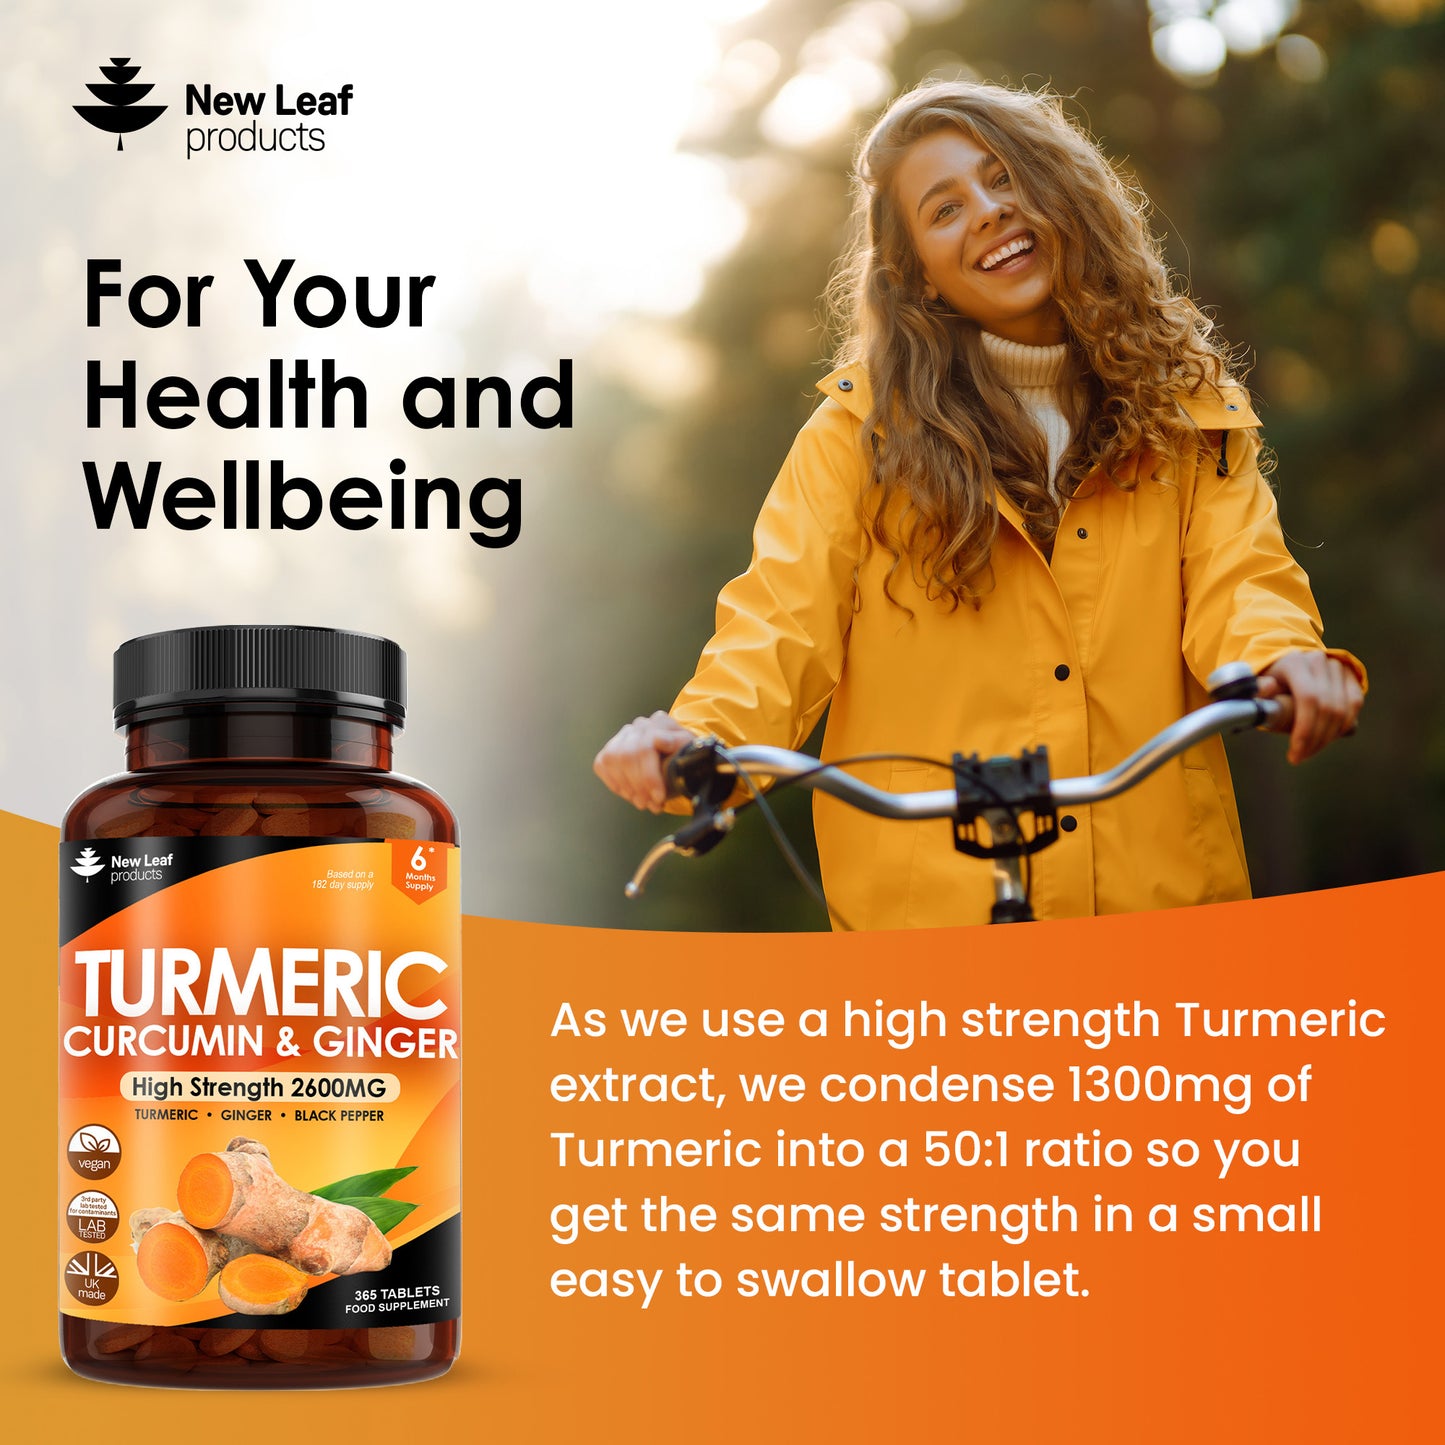 Turmeric Supplements Ginger & Black Pepper Turmeric Tablets 95% Curcumin (6 months supply)